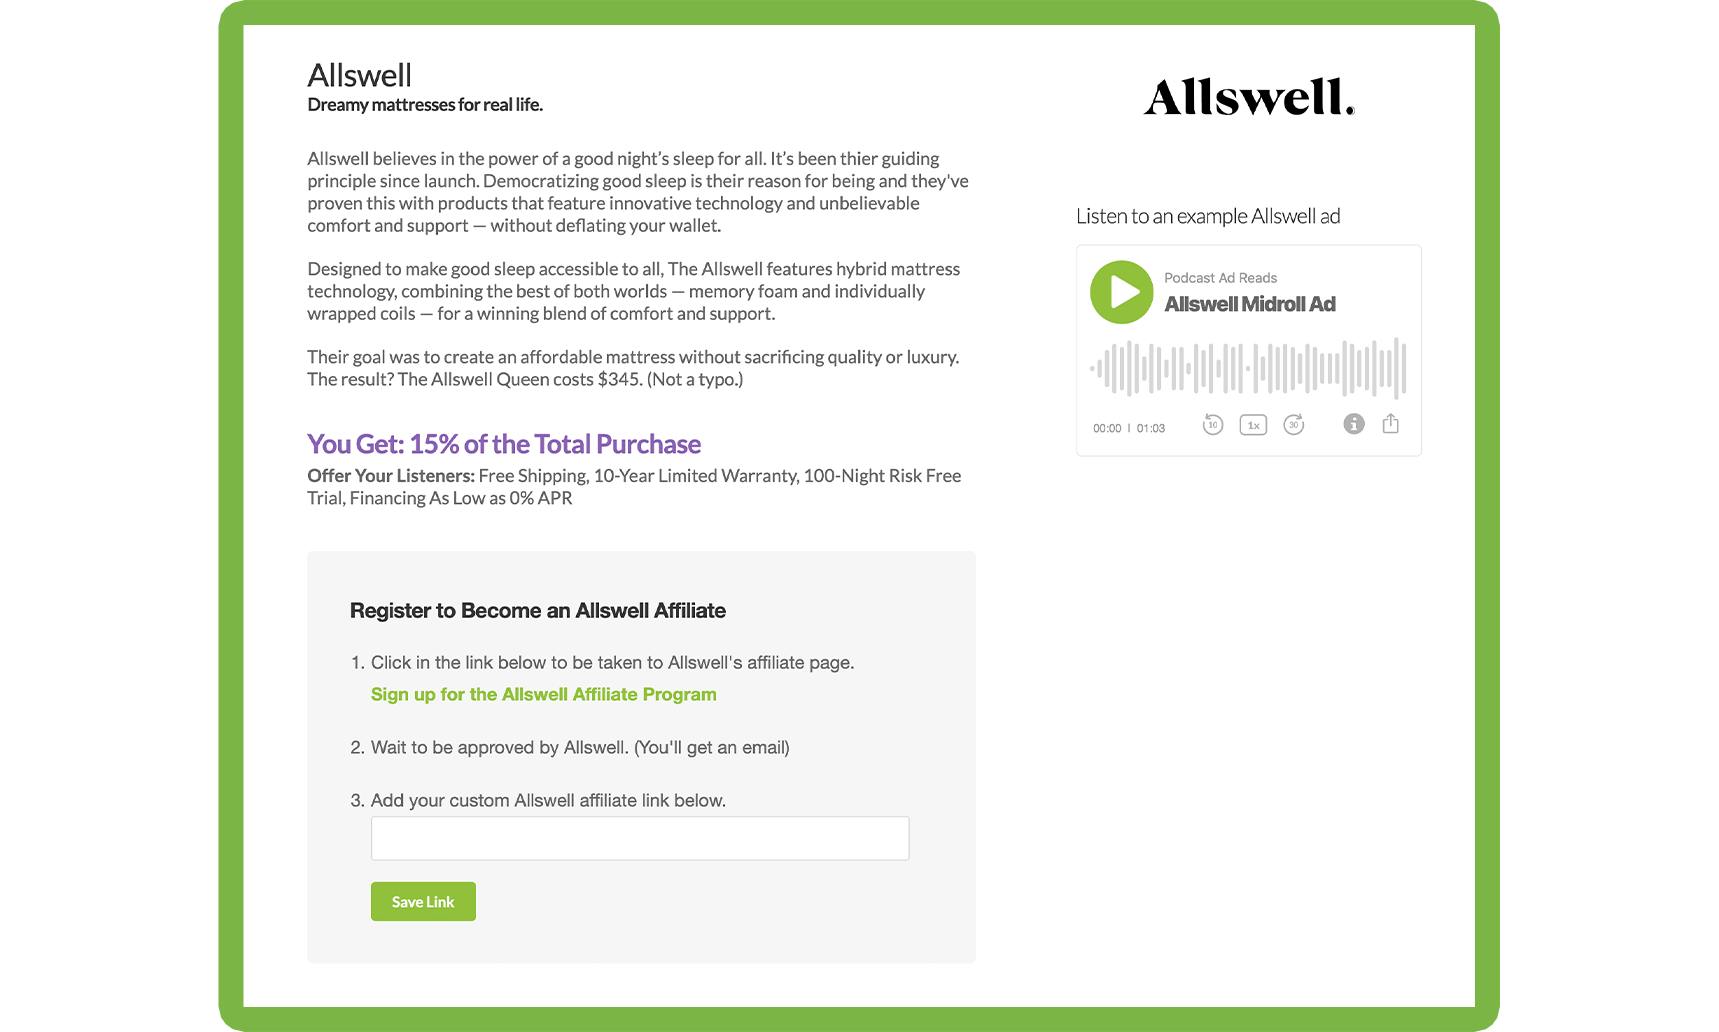 Allswell home page